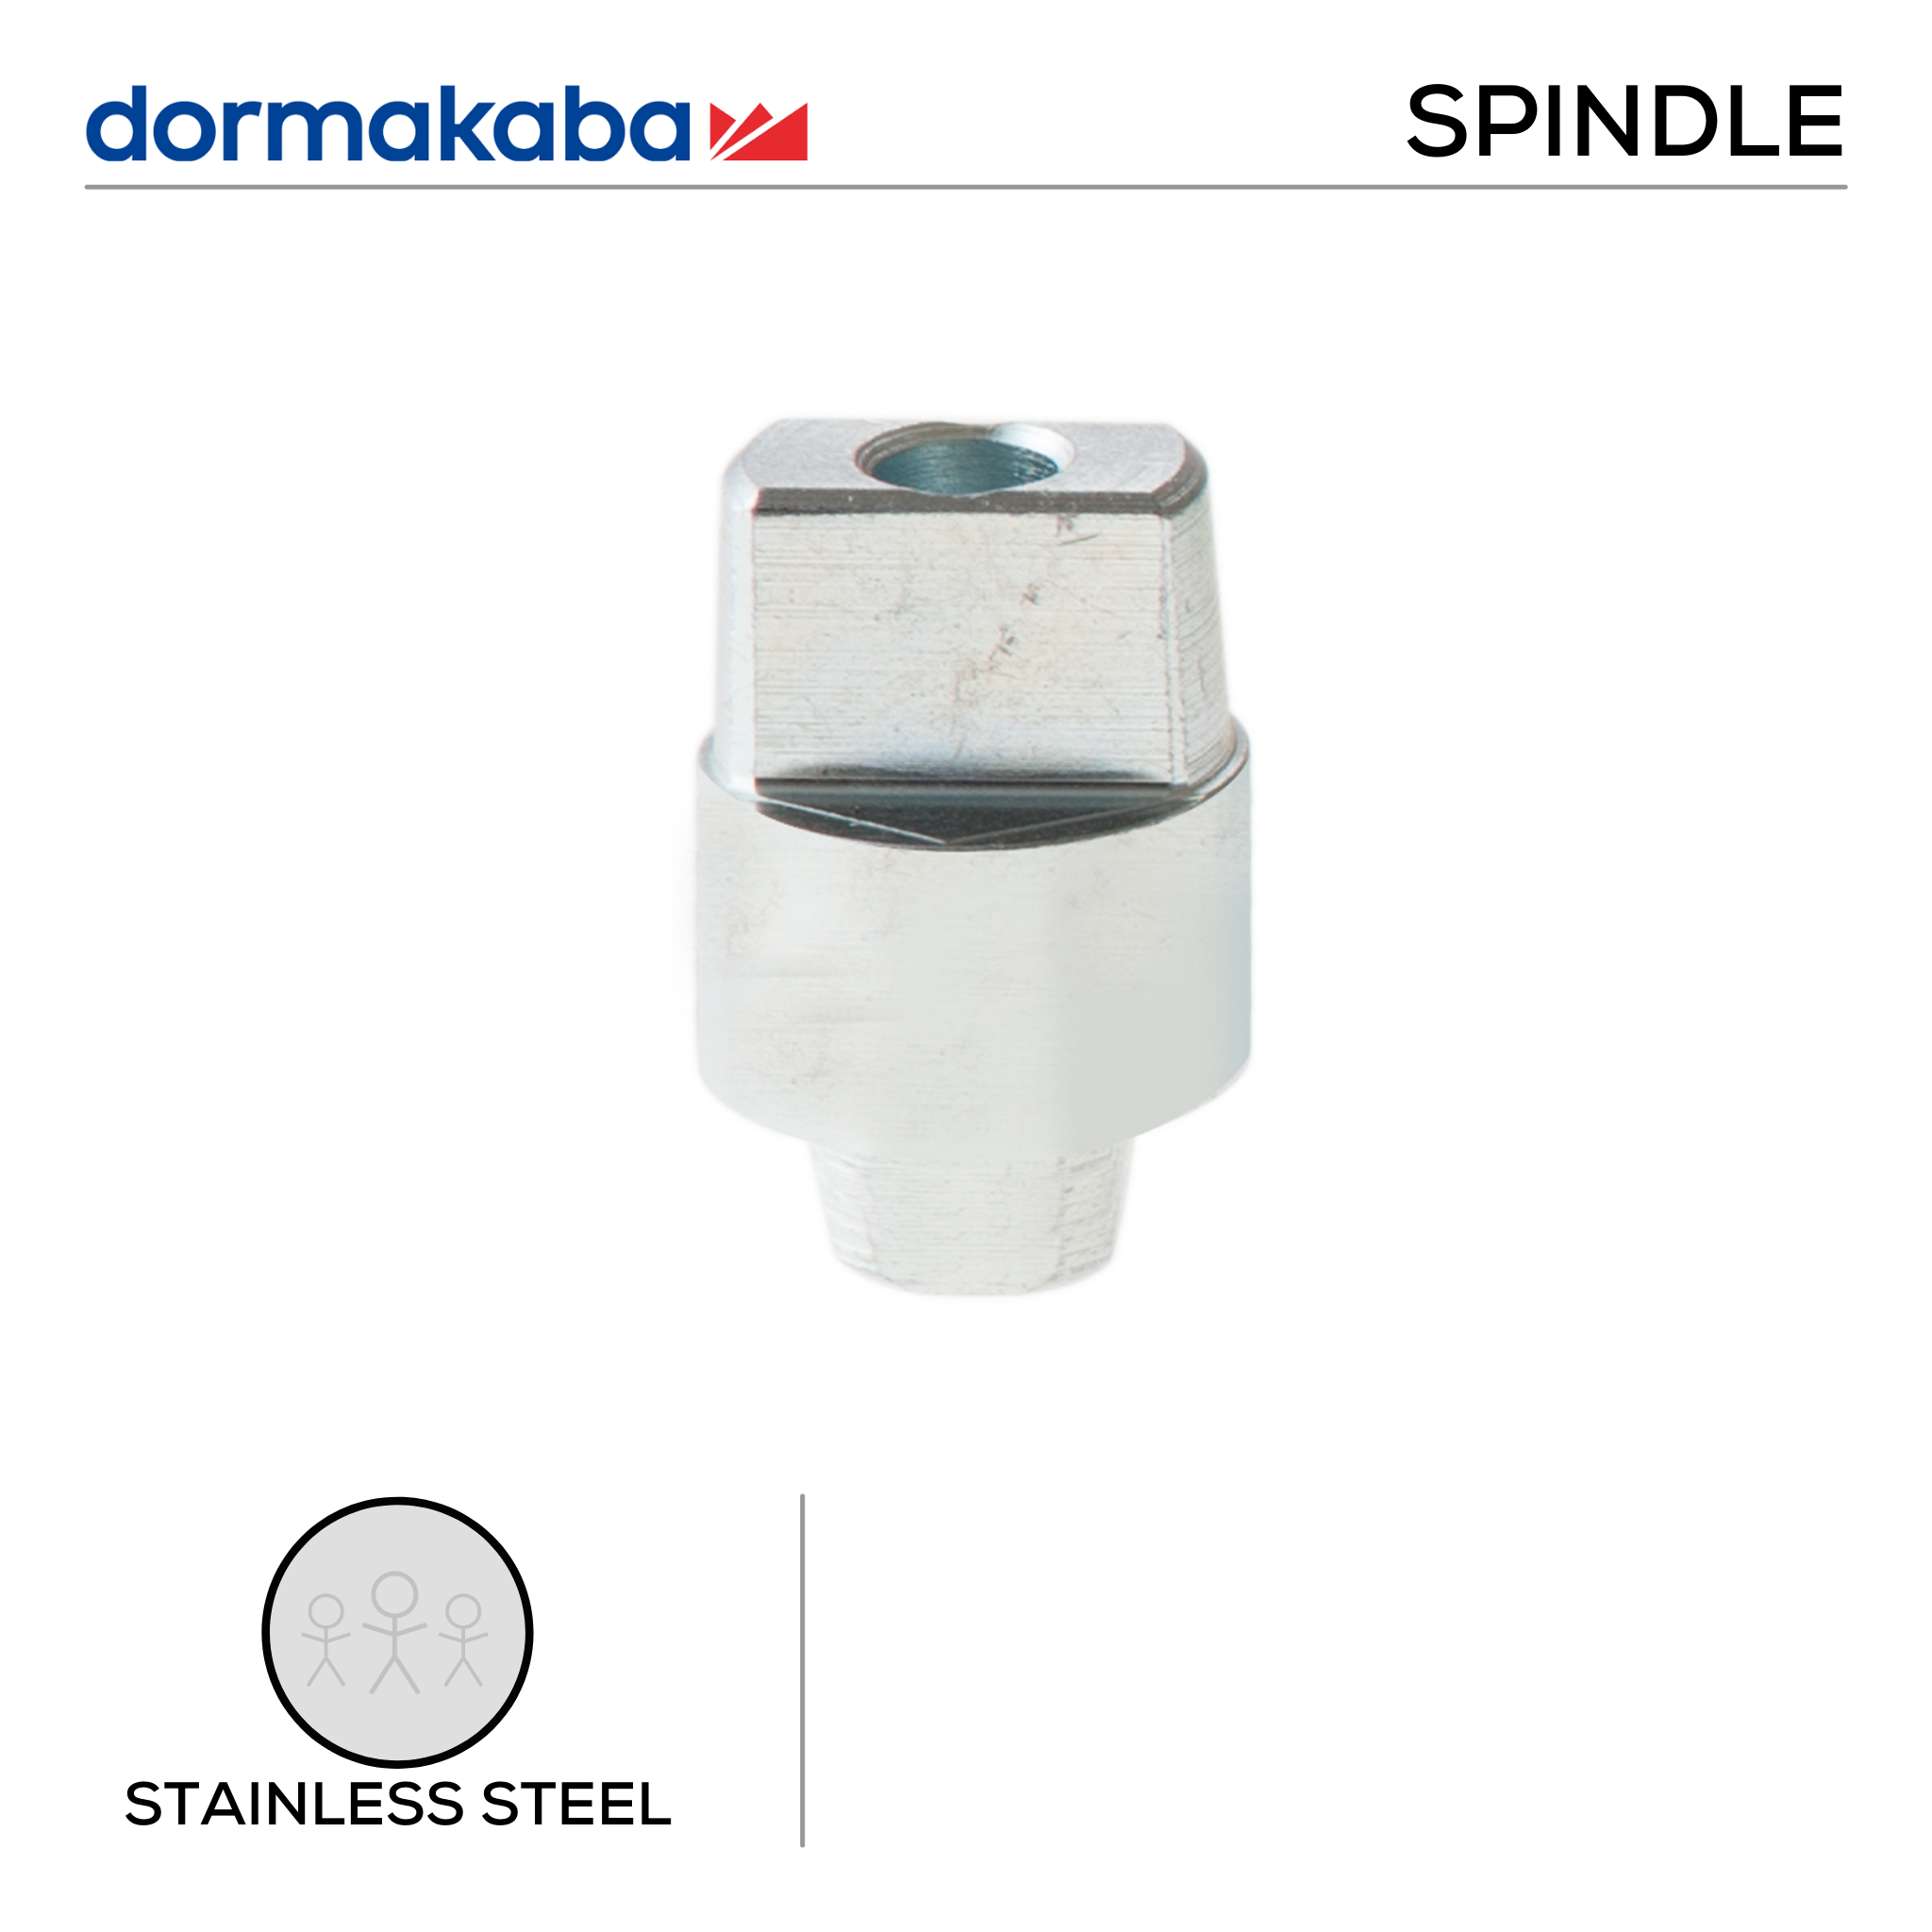 SPINDLE 15 TO 50MM, Spindle, Extended, Stainless Steel, DORMAKABA